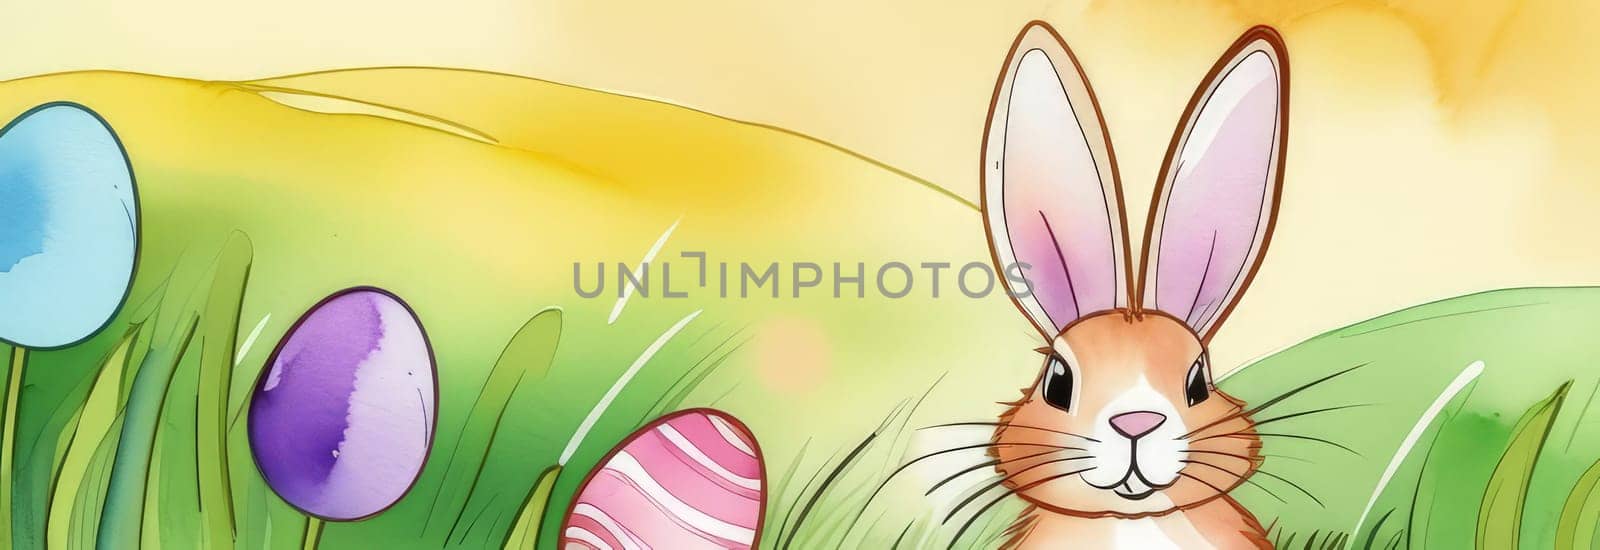 Holiday celebration banner with cute Easter bunny with decorated eggs and spring flowers on green spring meadow. Rabbit in landscape. Happy Easter greeting card, banner, festive background. Copy space